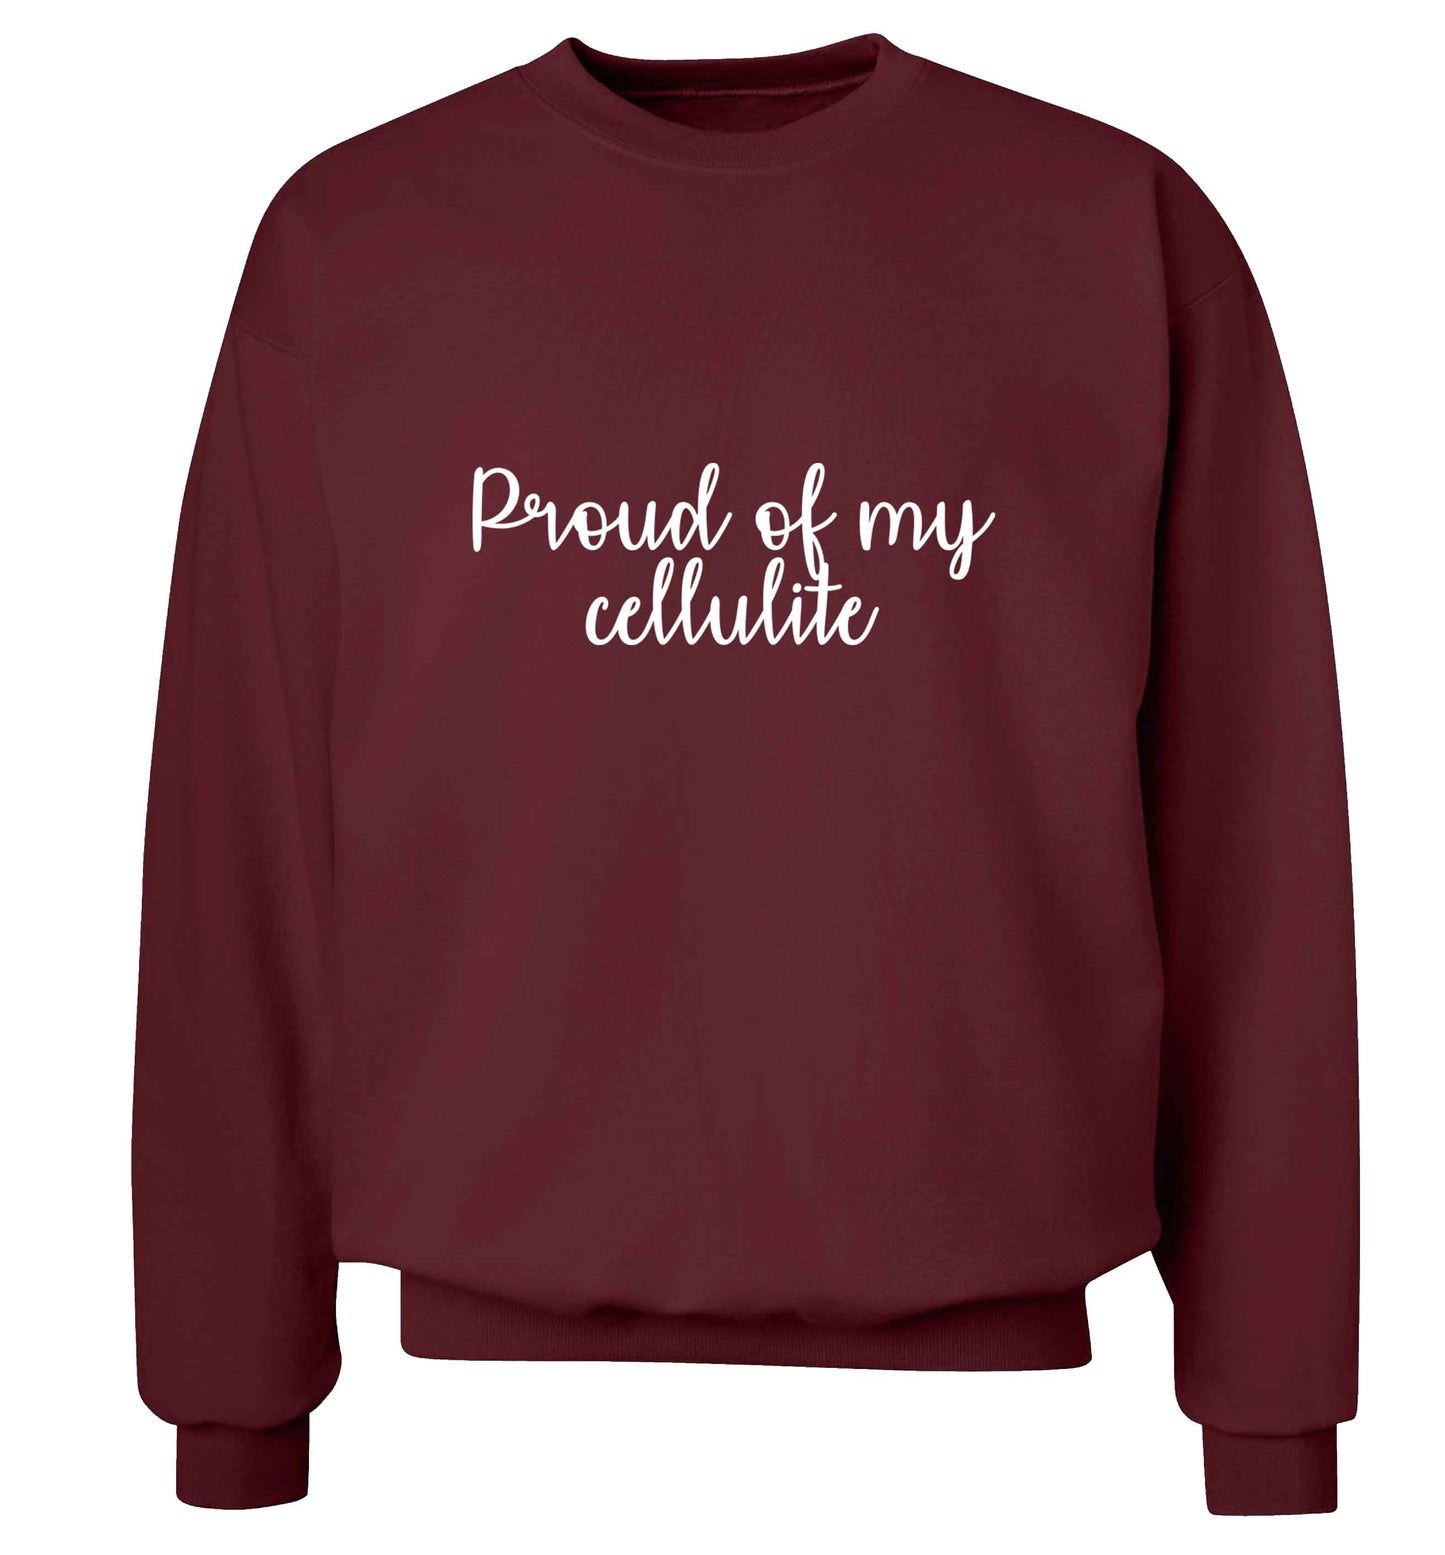 Proud of my cellulite adult's unisex maroon sweater 2XL